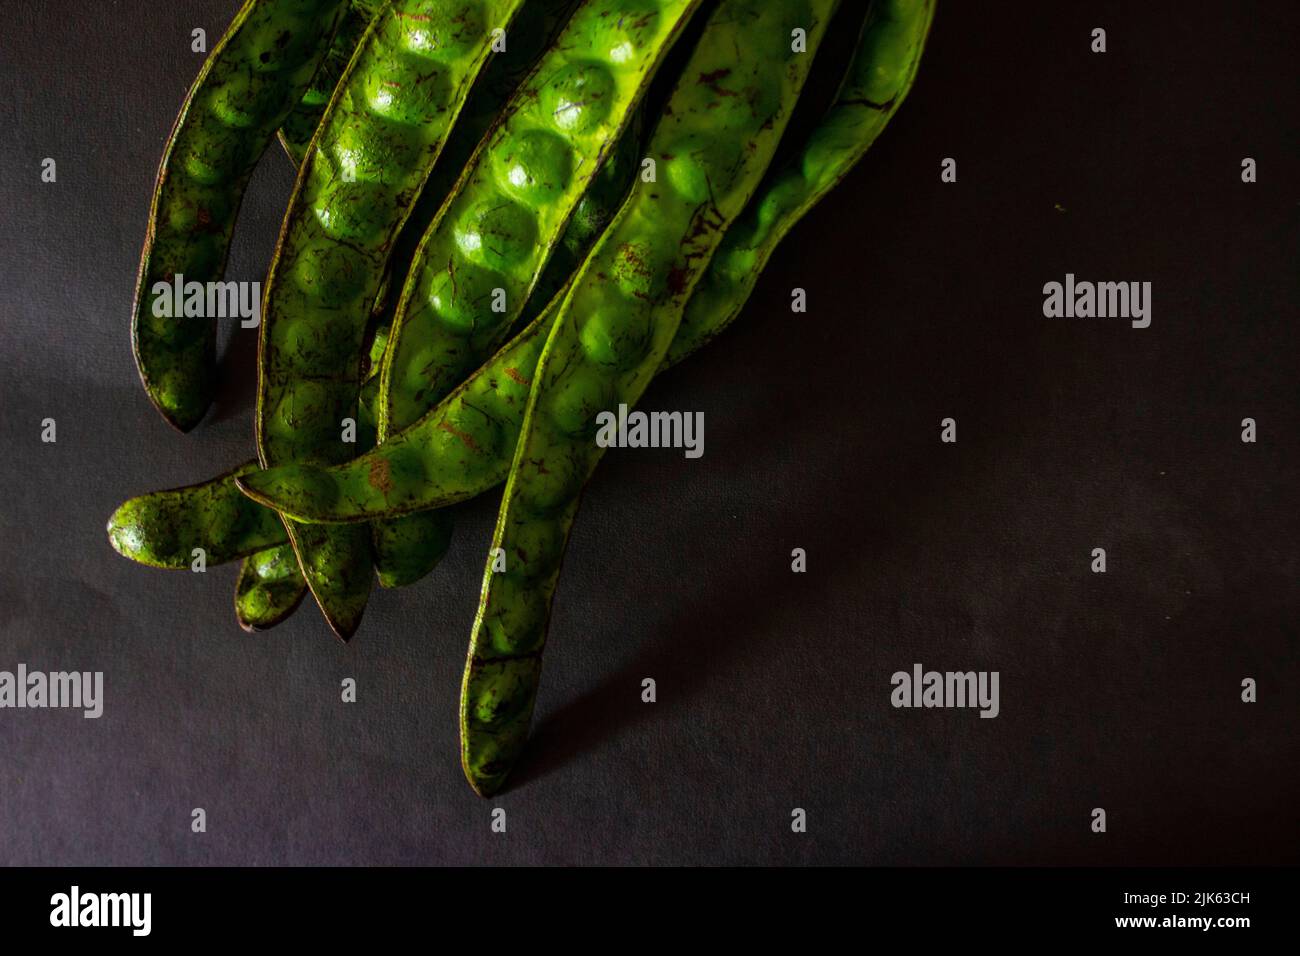 Petai, Twisted cluster bean, Stink bean, Bitter Bean, Parkia speciosa seeds, isolated on black background Stock Photo